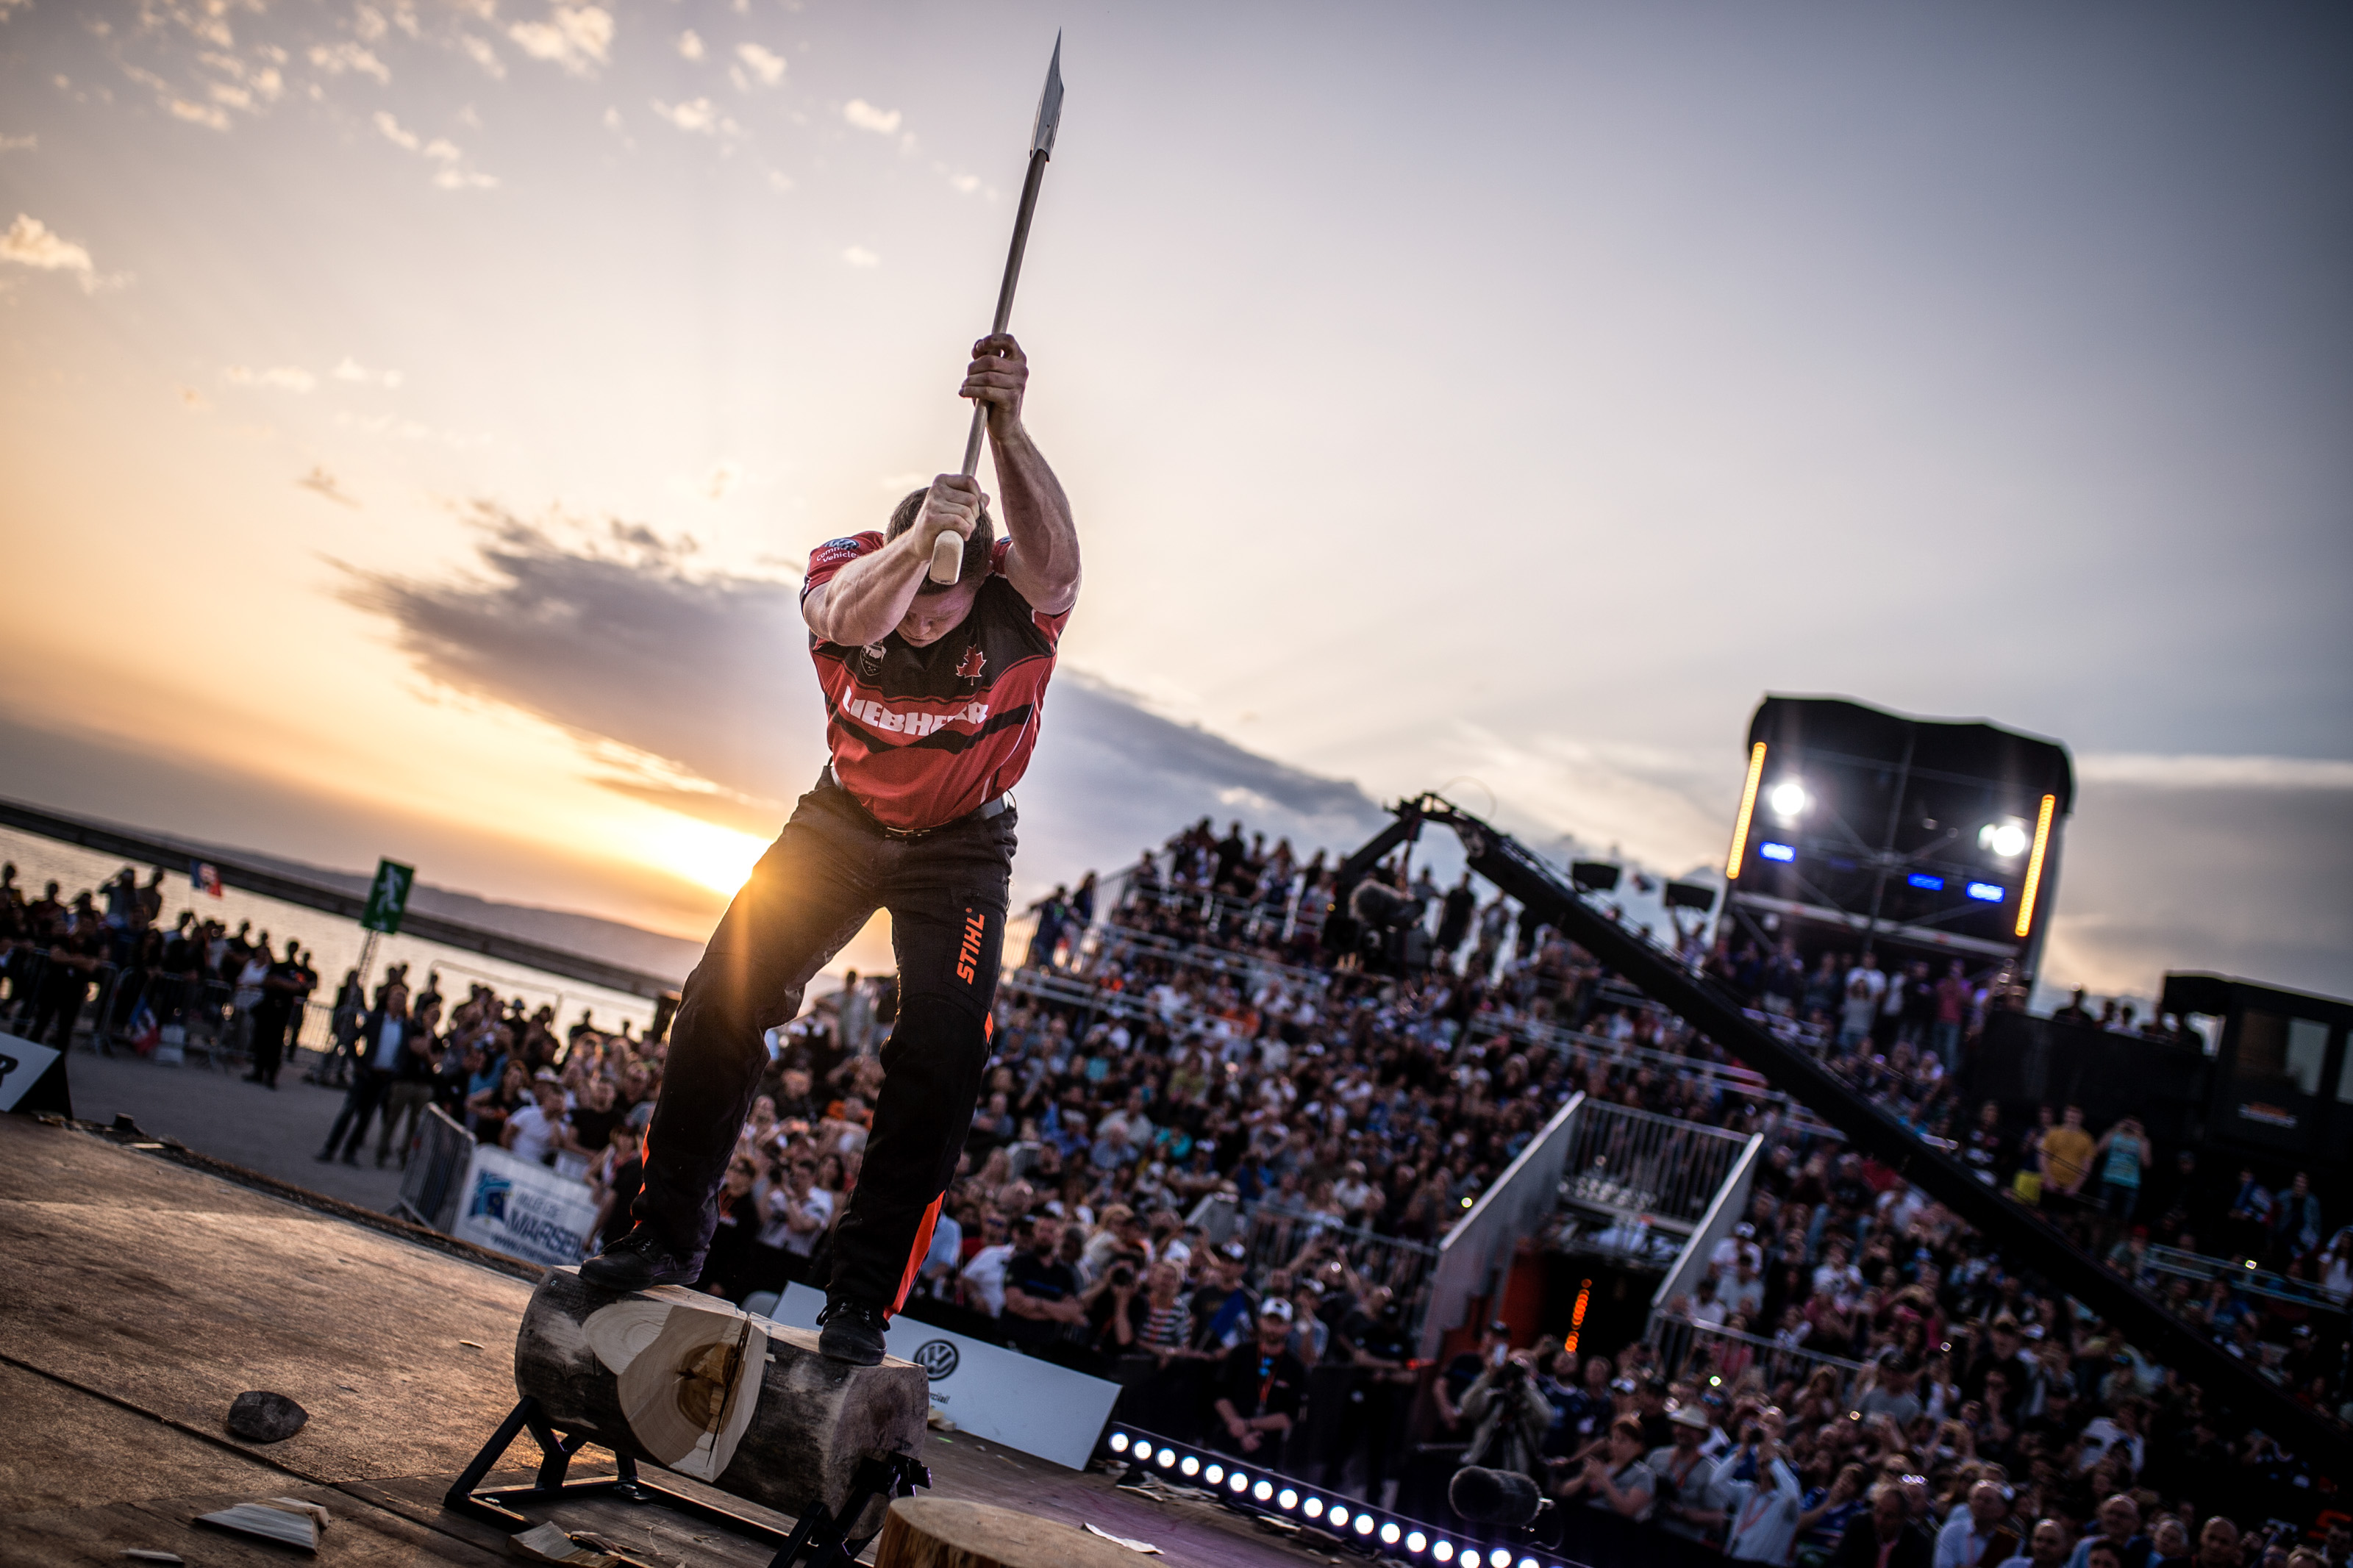 STIHL TIMBERSPORTS® athlete Stirling Hart from Canada at the Champions Trophy 2018 during the Underhand Chop.